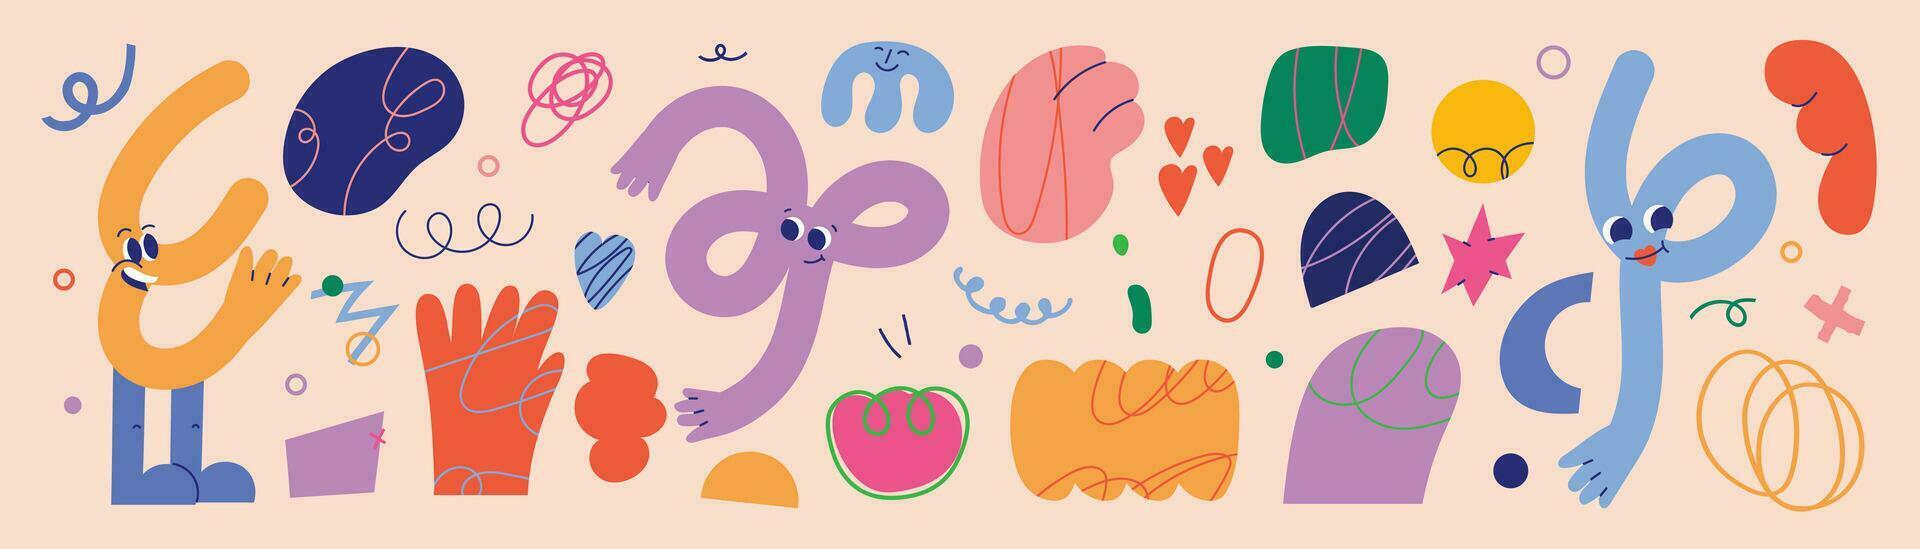 Set of abstract retro organic shapes vector. Collection of contemporary figure, speech bubble, heart, hand in funky groovy style. Cute hippie design element perfect for banner, print, stickers. vector